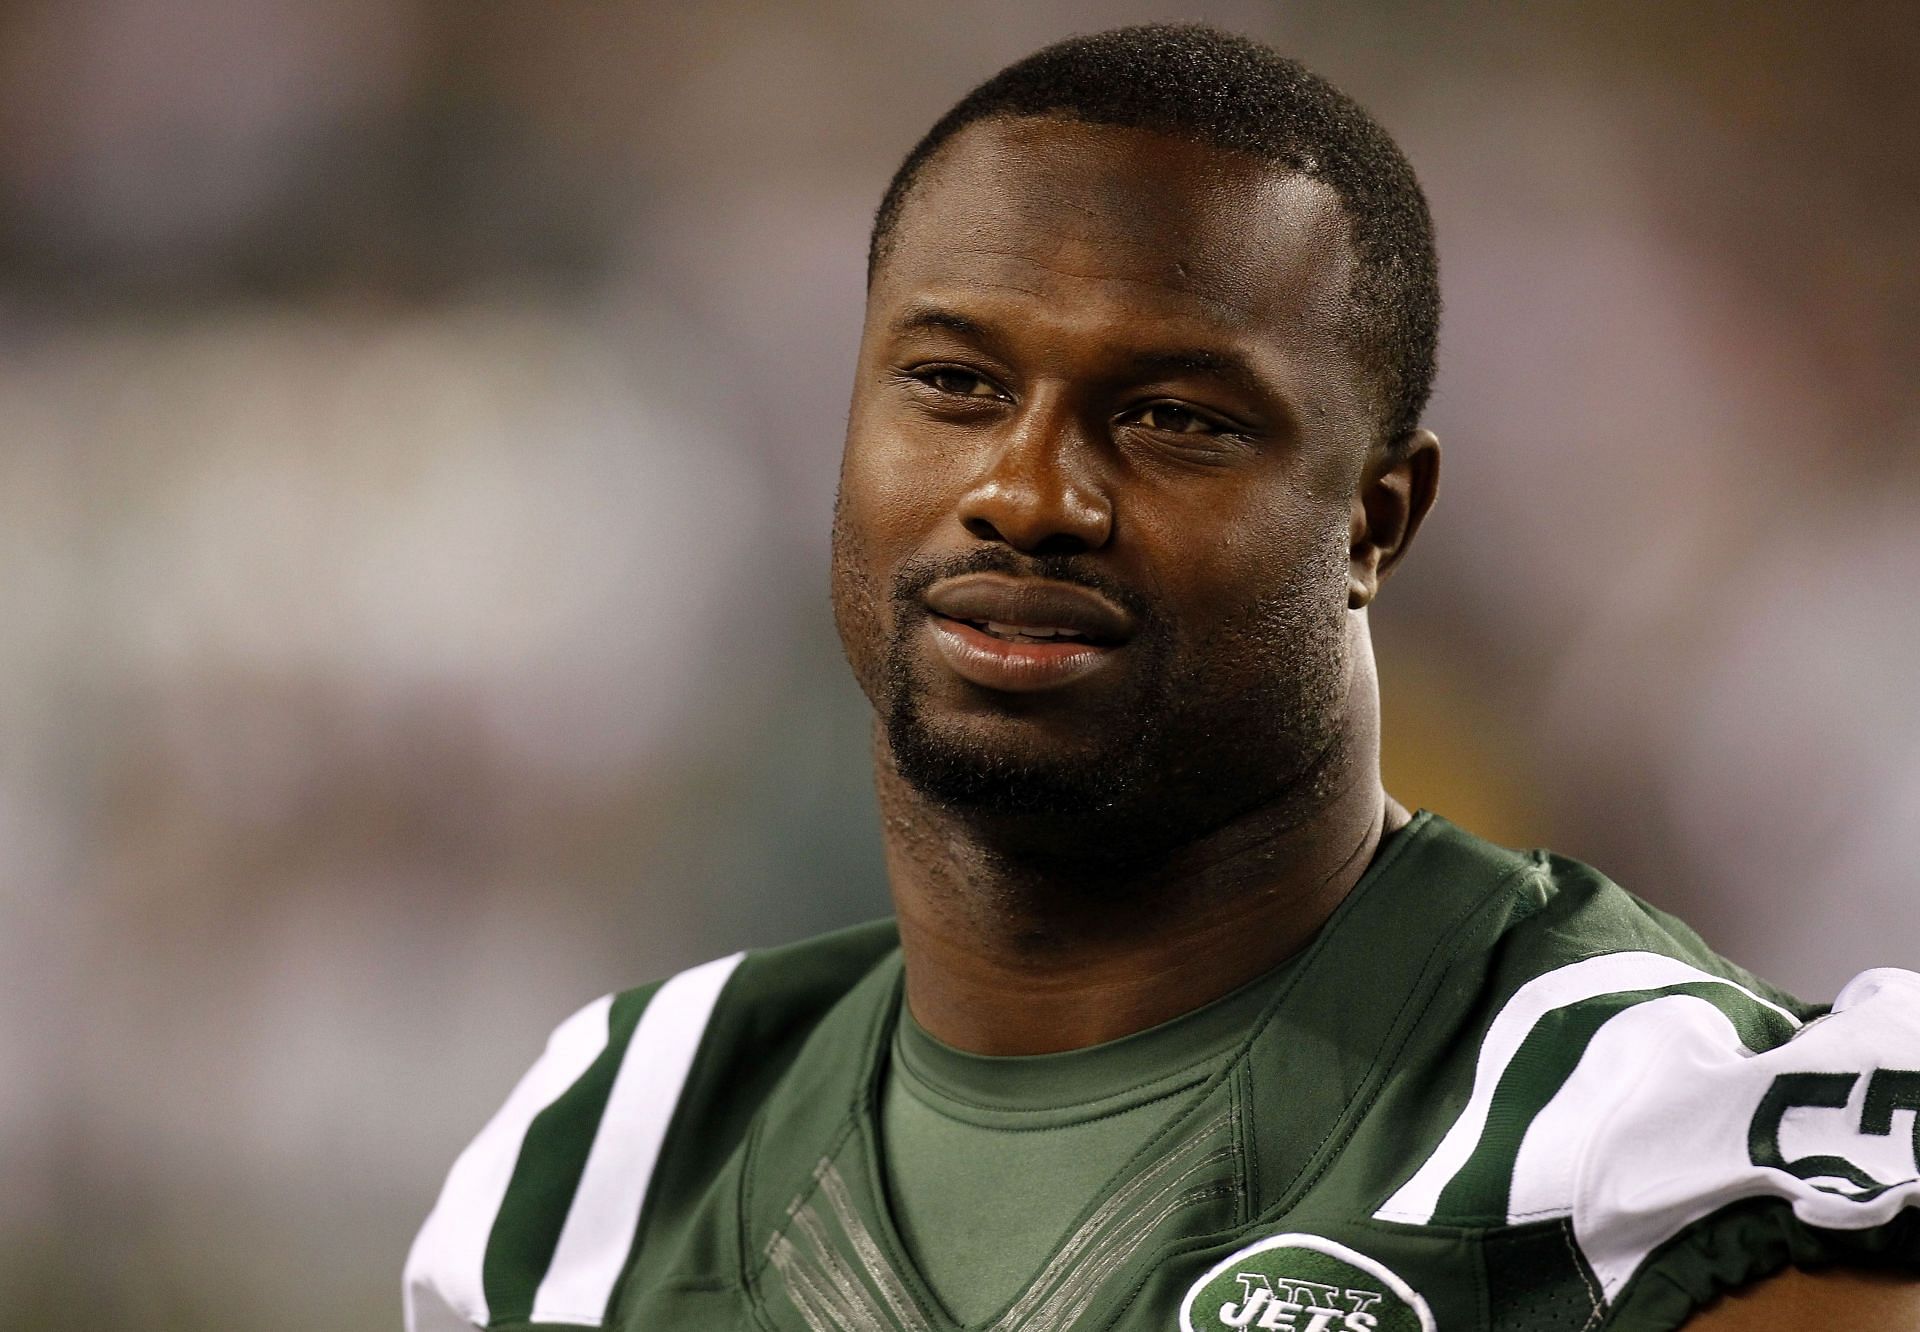 Scott as a member of the New York Jets (2009 - 2012)